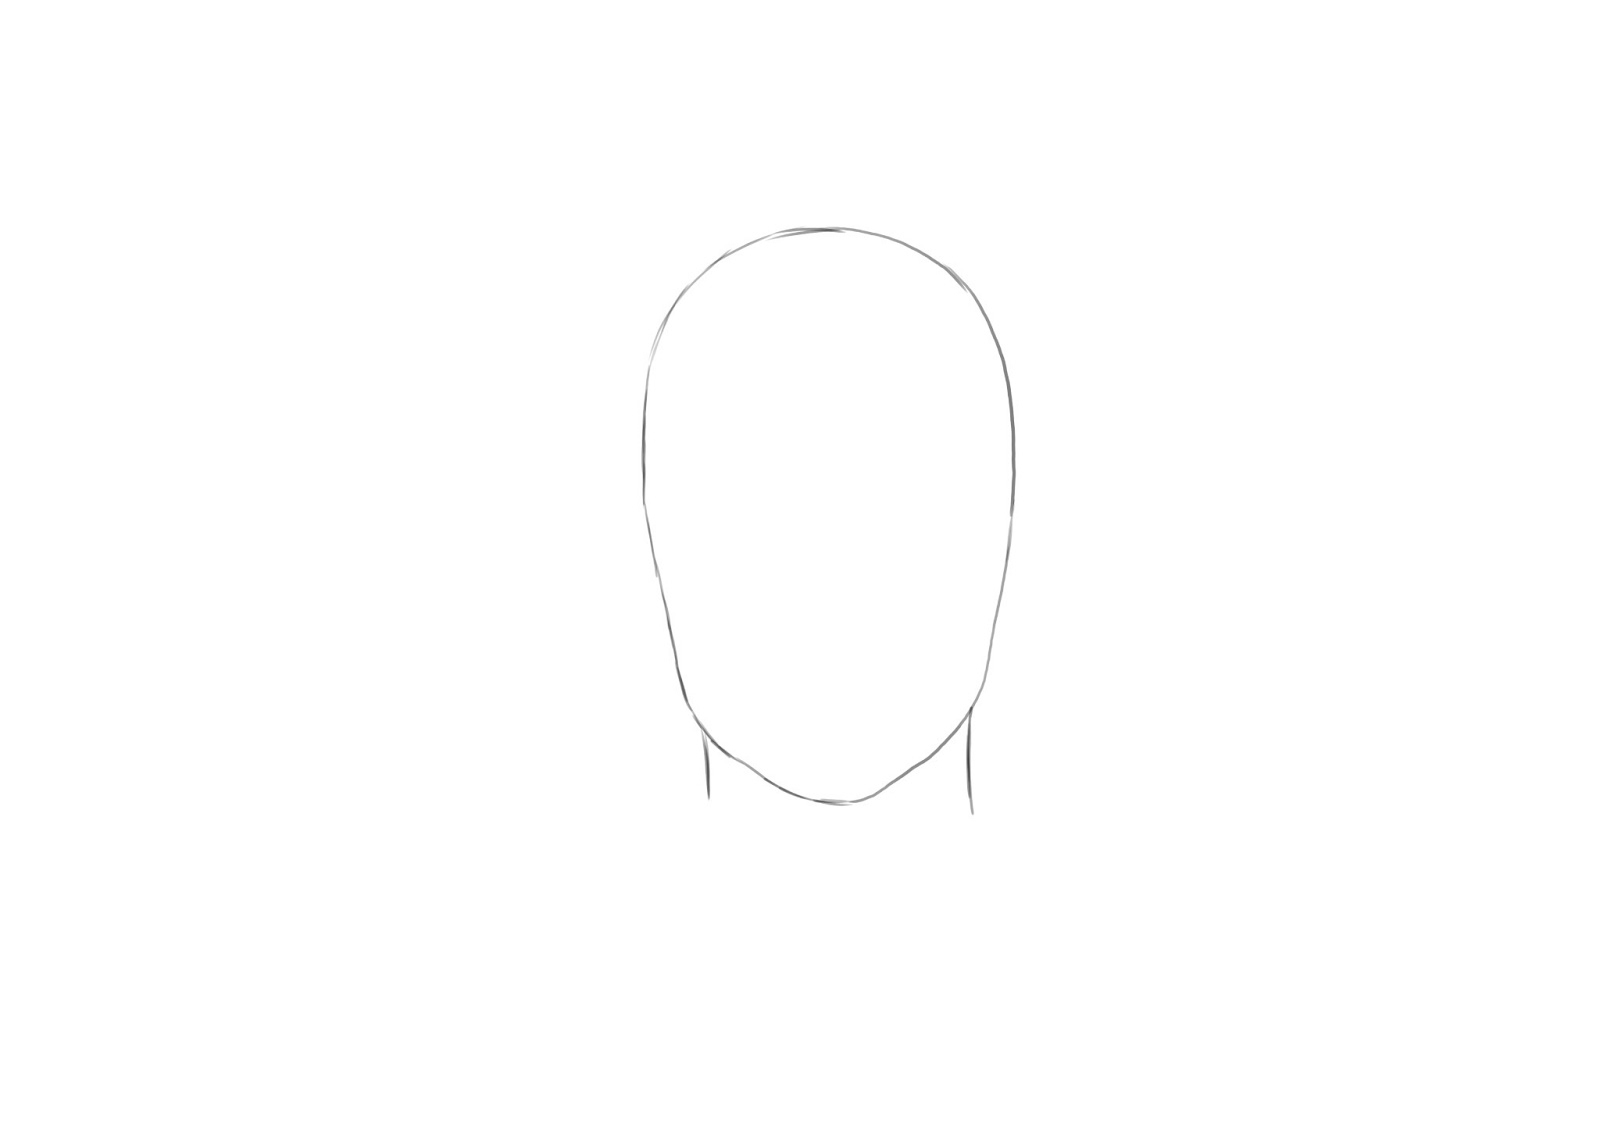 face outline